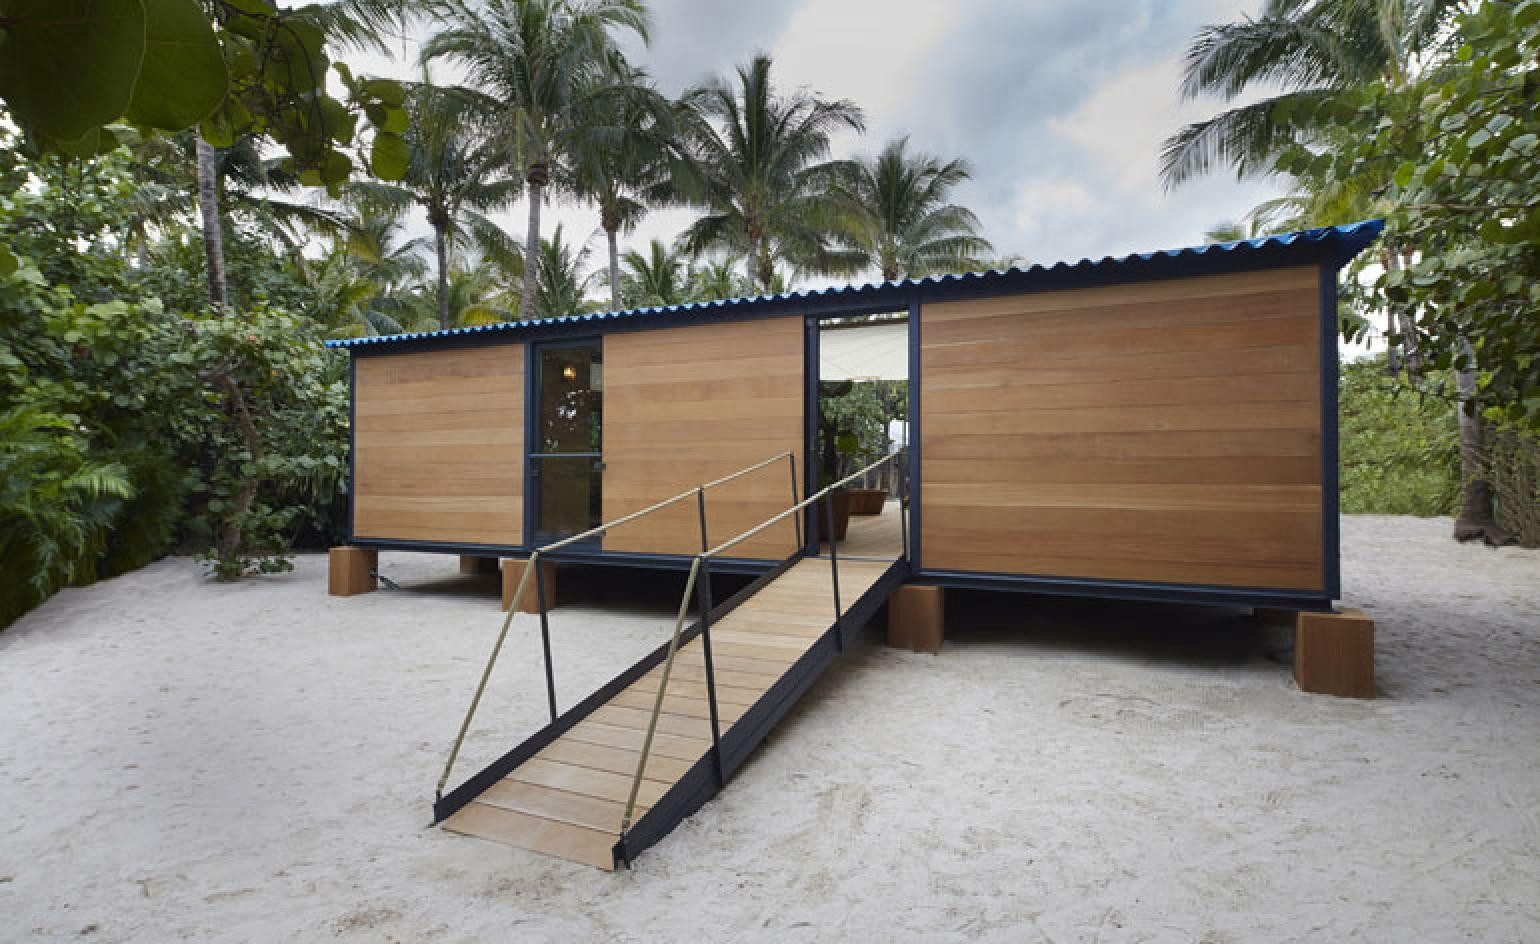 Charlotte Perriand lost holiday house built by Louis Vuitton for